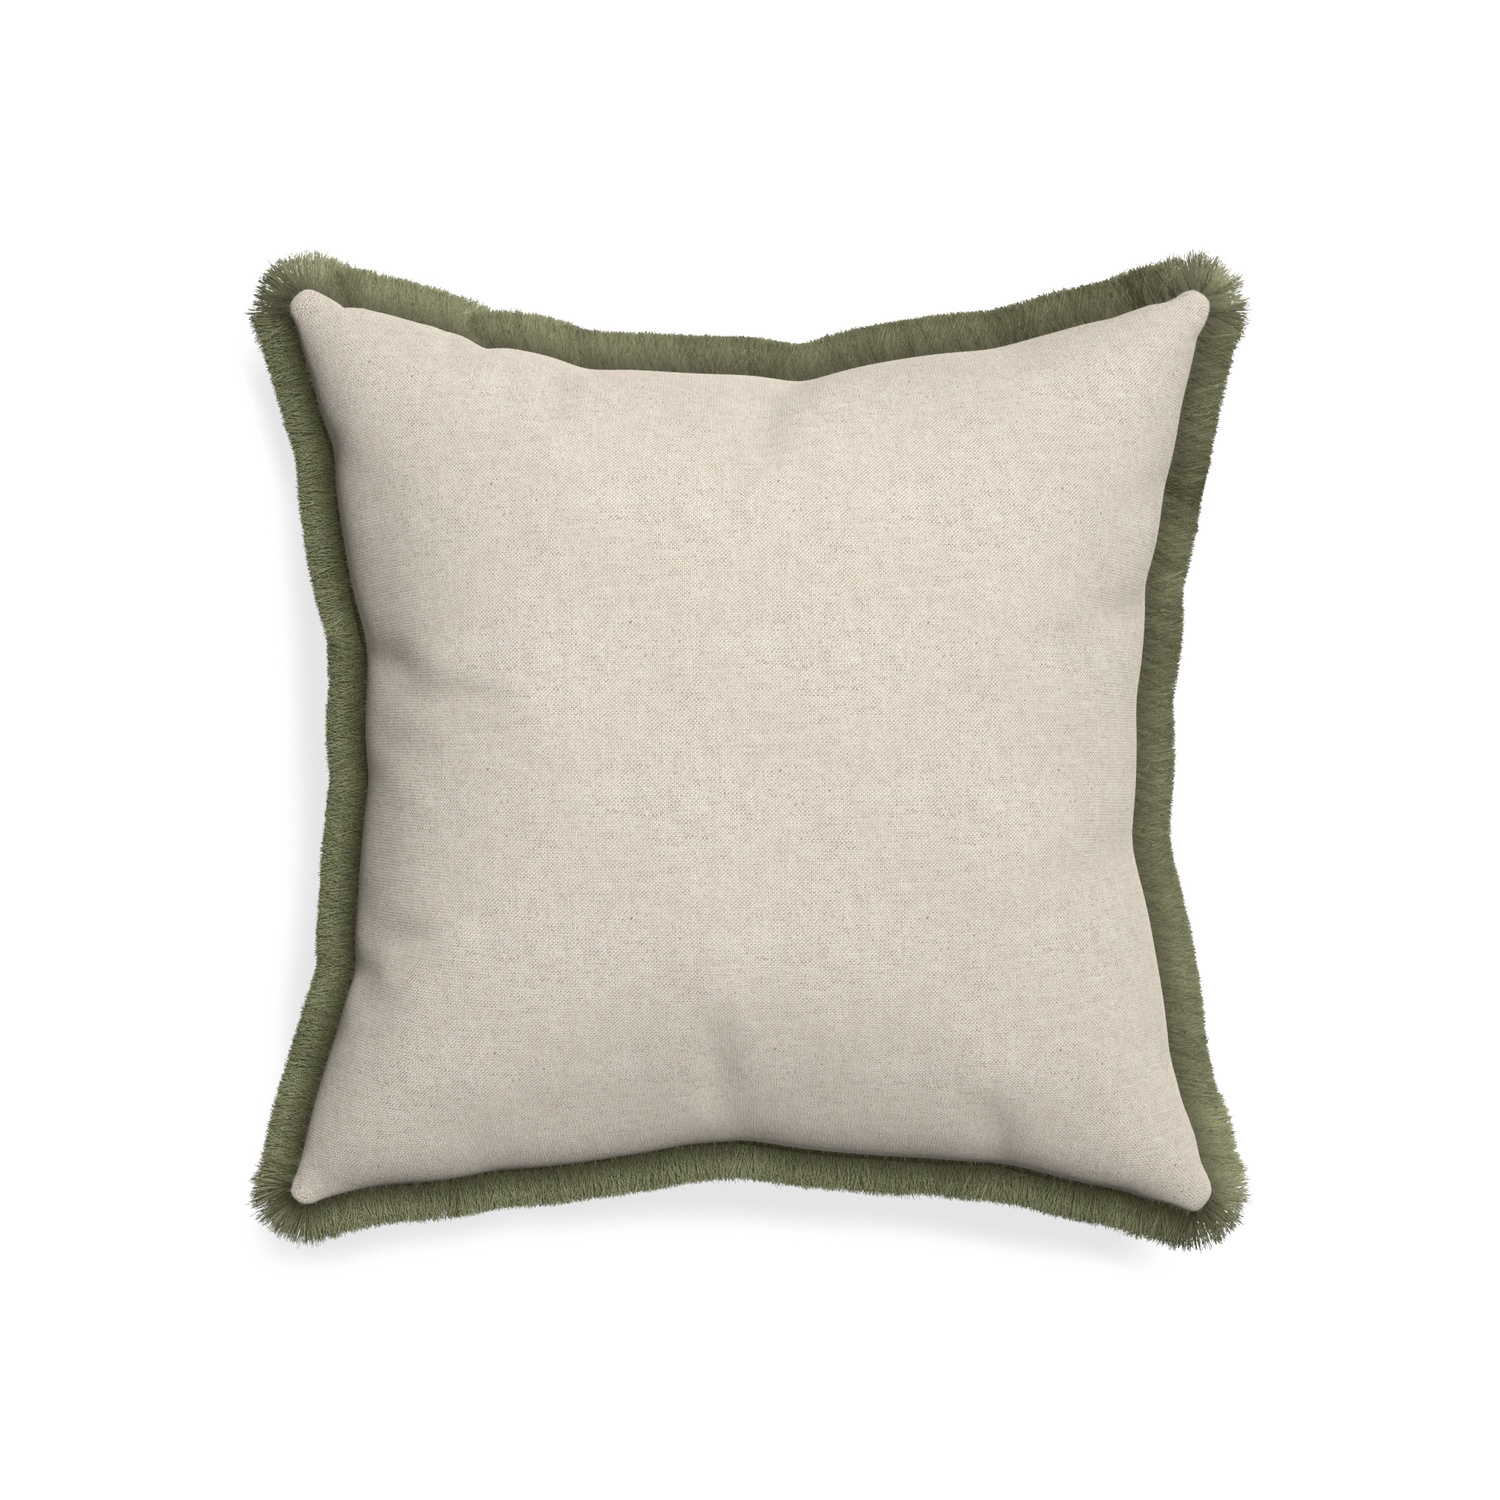 20-square oat custom light brownpillow with sage fringe on white background